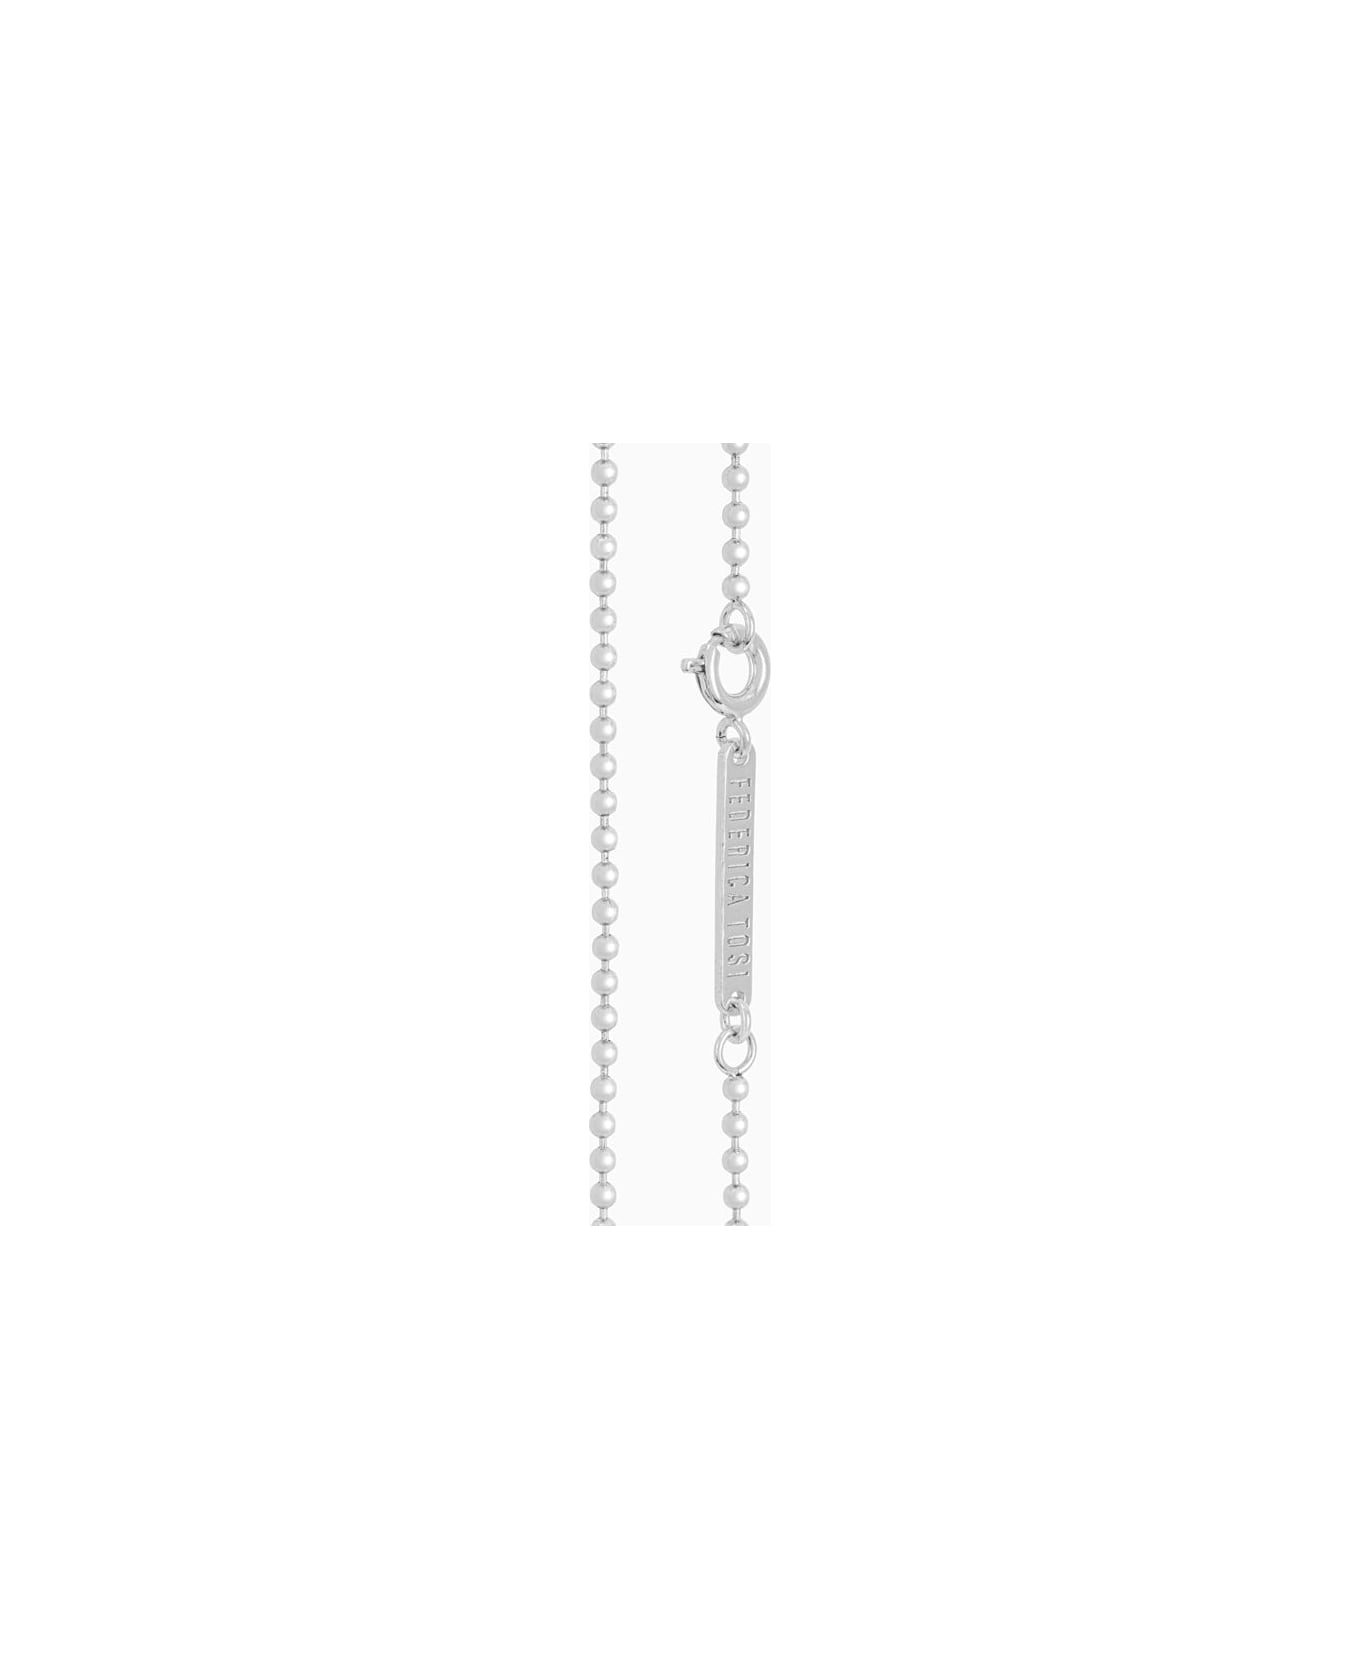 Federica Tosi Lace Long Ally Silver - Silver